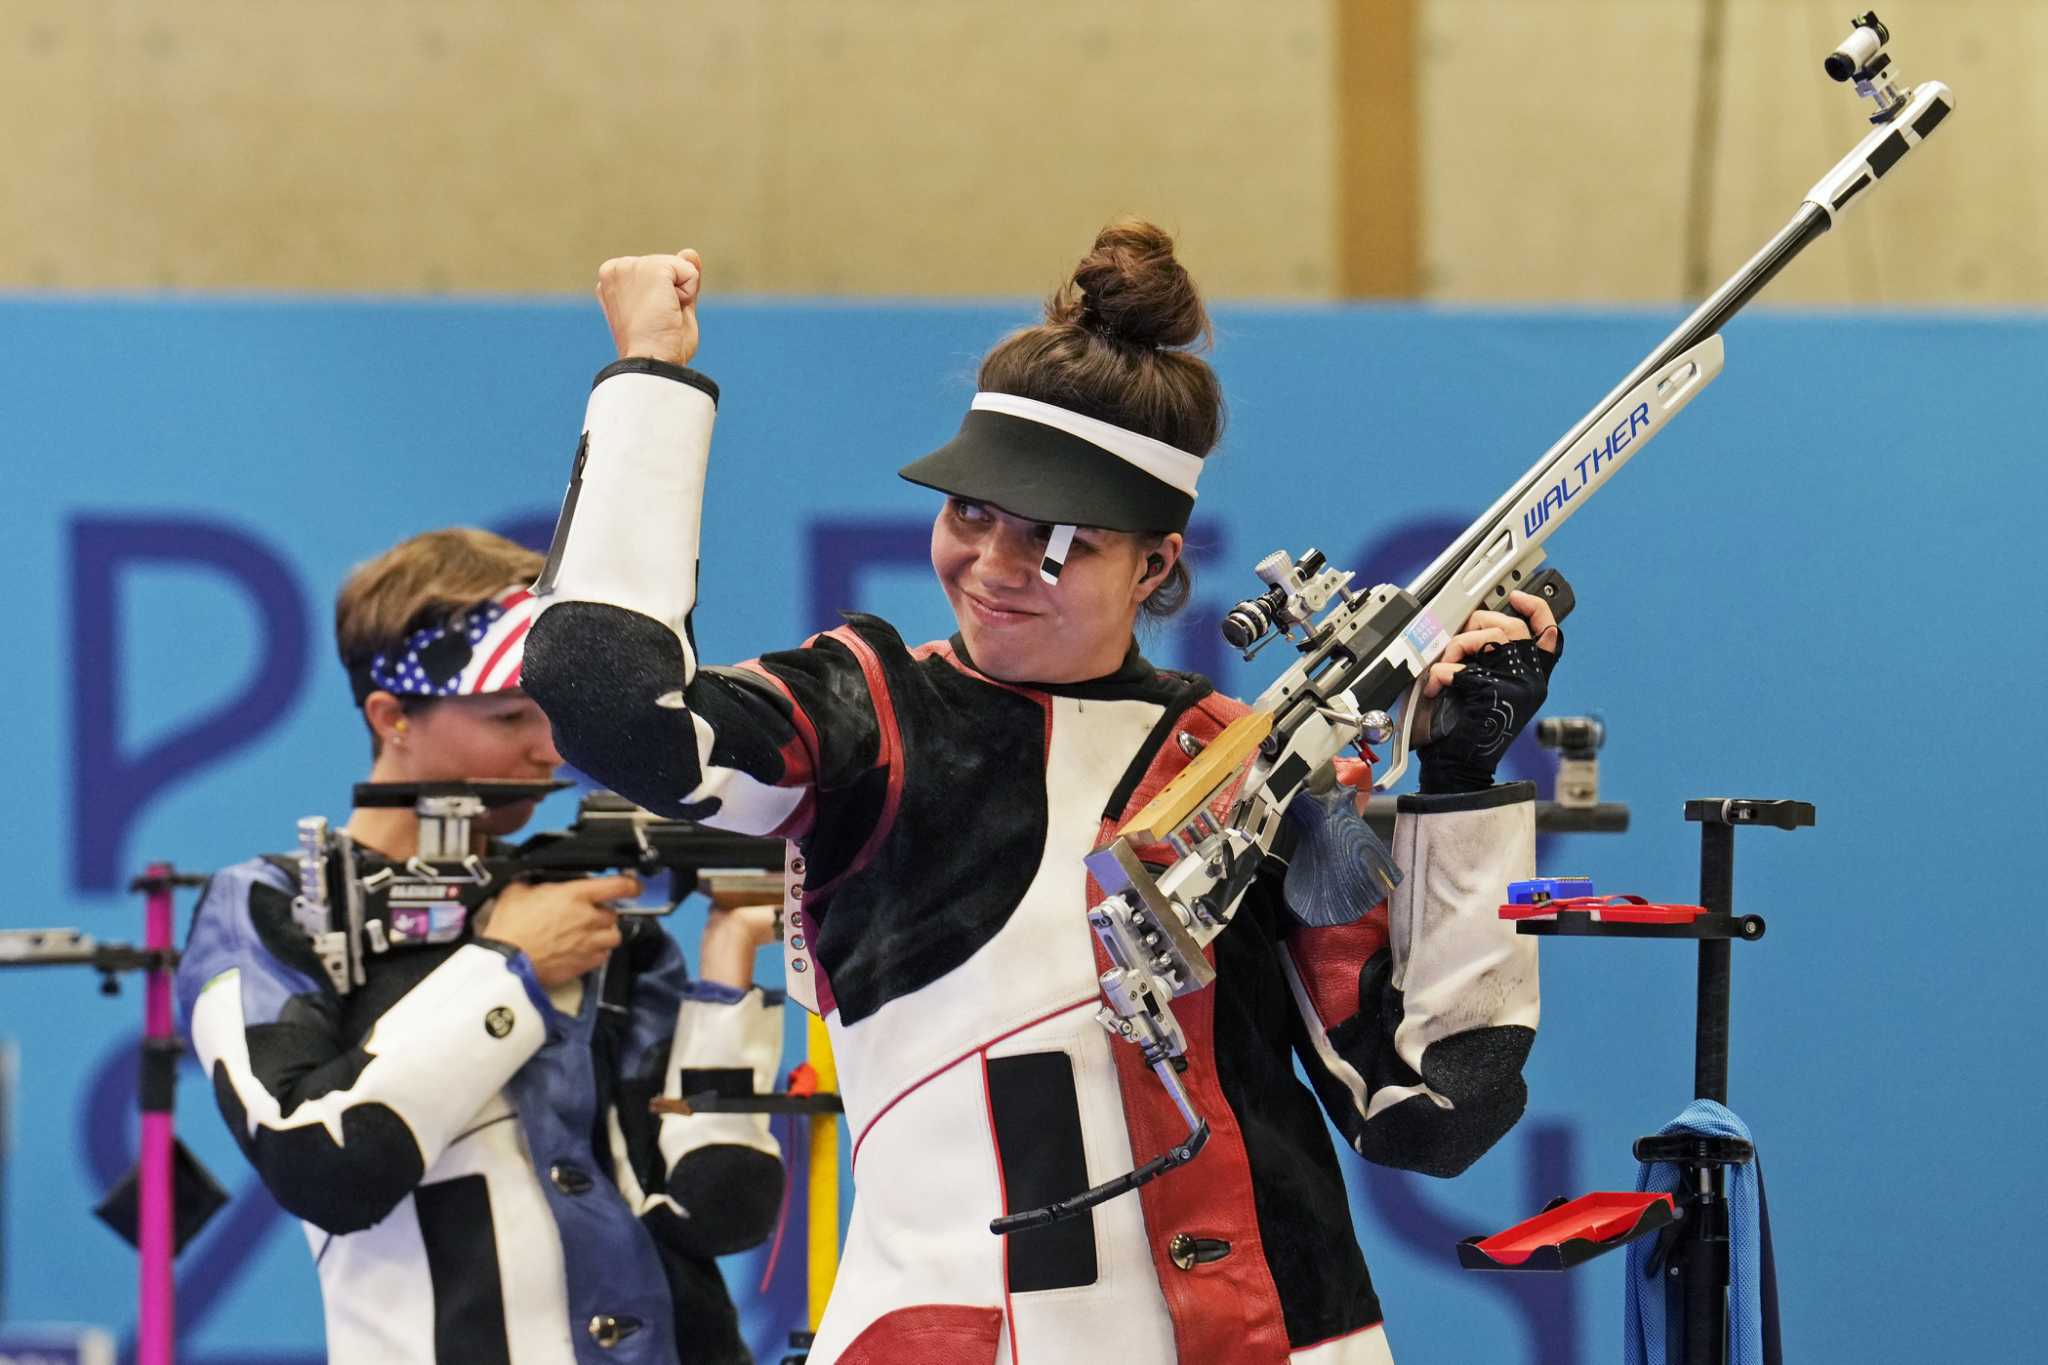 Chiara Leone wins women's 50-meter rifle 3 positions shooting for 1st Swiss gold at Paris Olympics